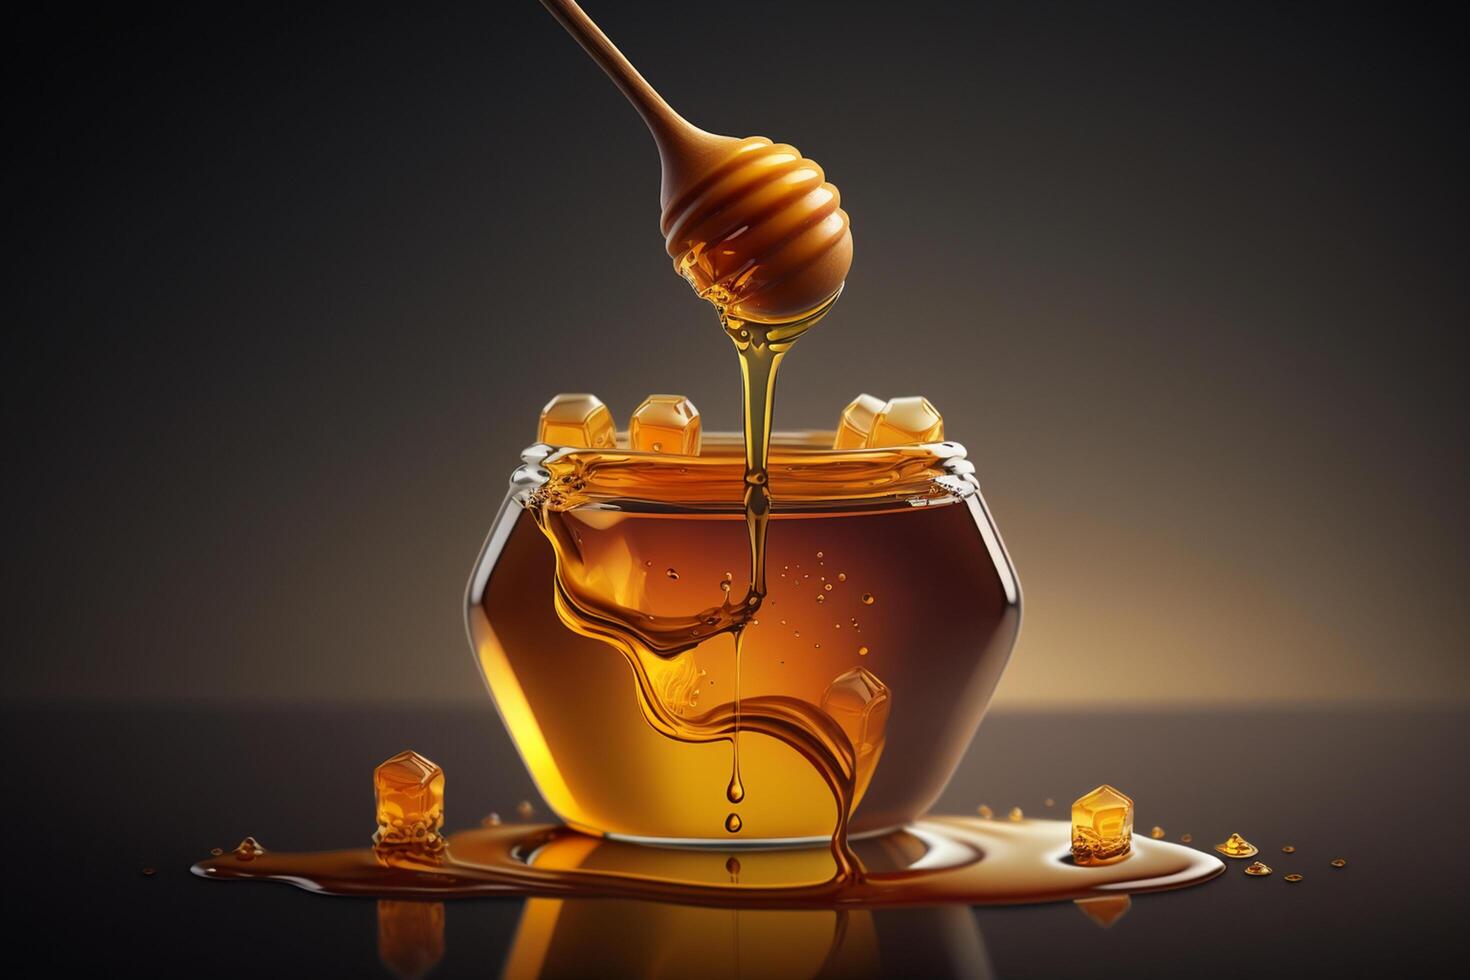 Illustration honey dipper with dripping honey closeup beekeeper photo